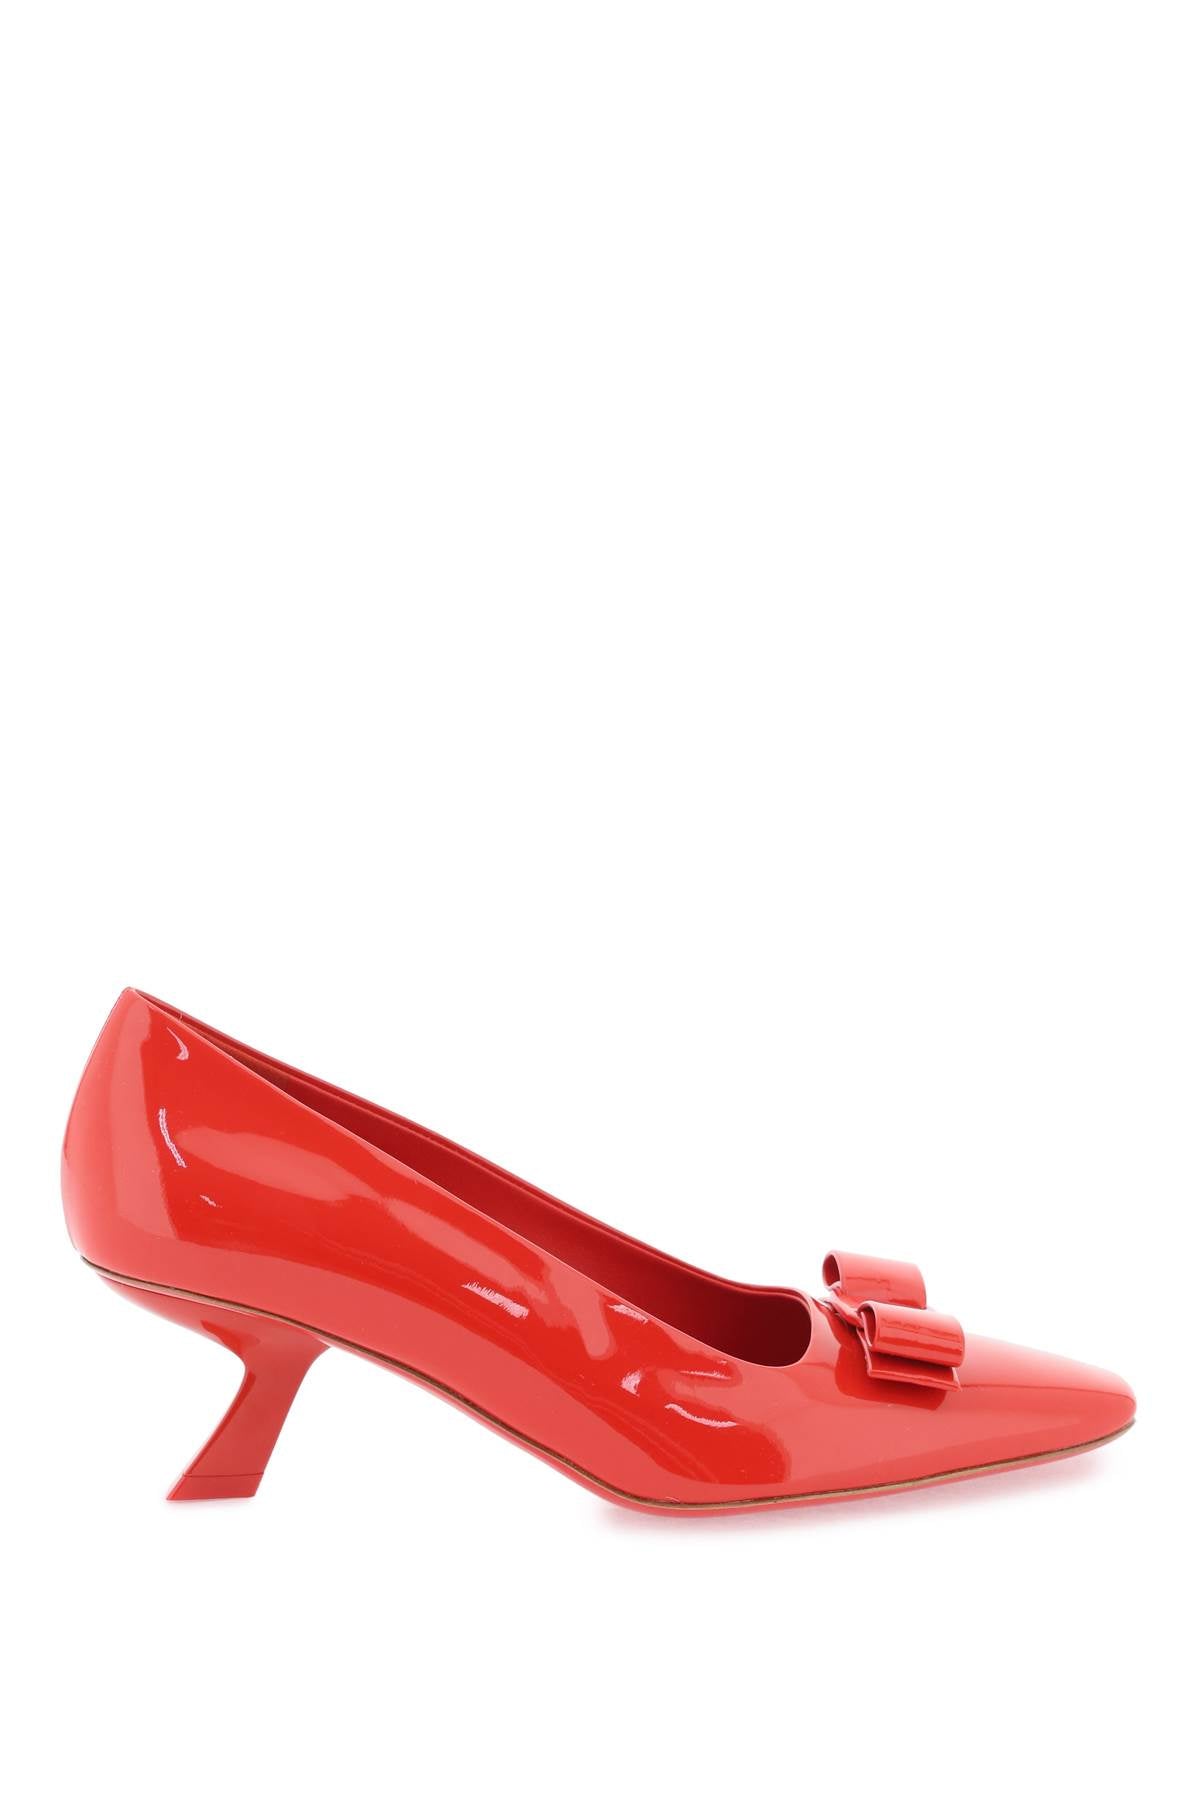 FERRAGAMO Sophisticated Red Patent Leather Heels with Iconic Vara Bow - Women's Fashion Pumps